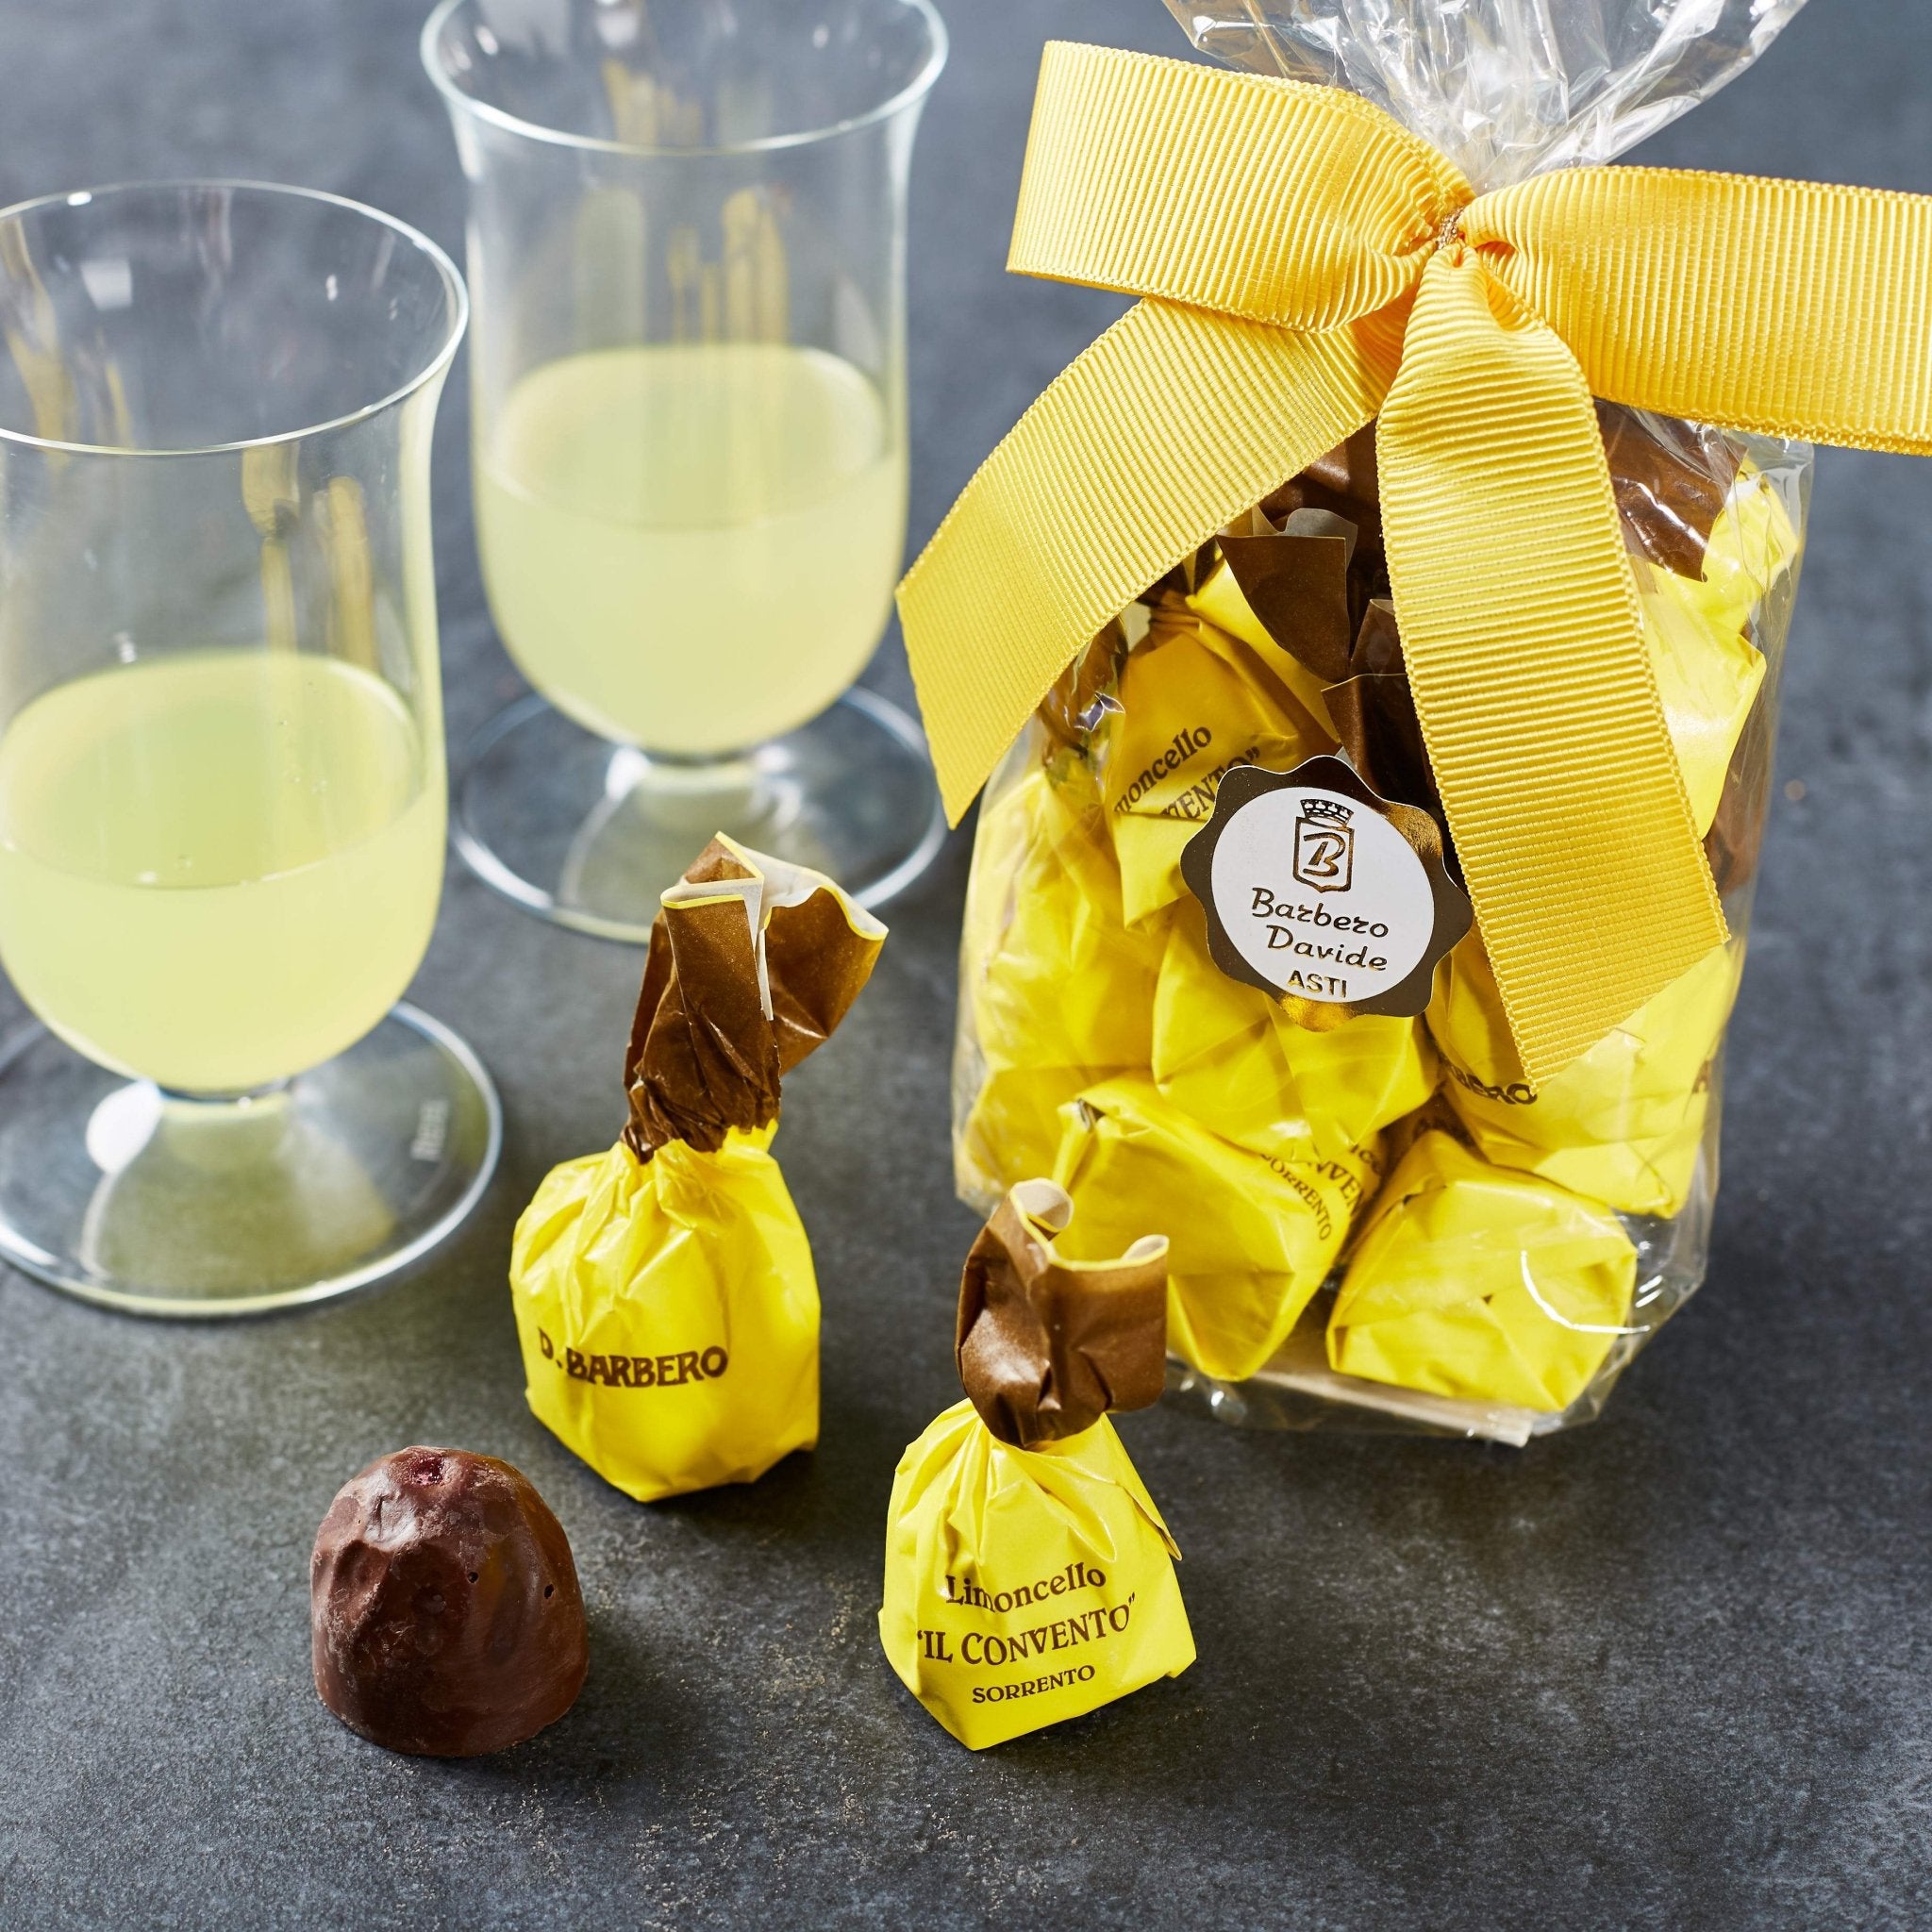 Limoncello Chocolate Truffles 200g by D. Barbero